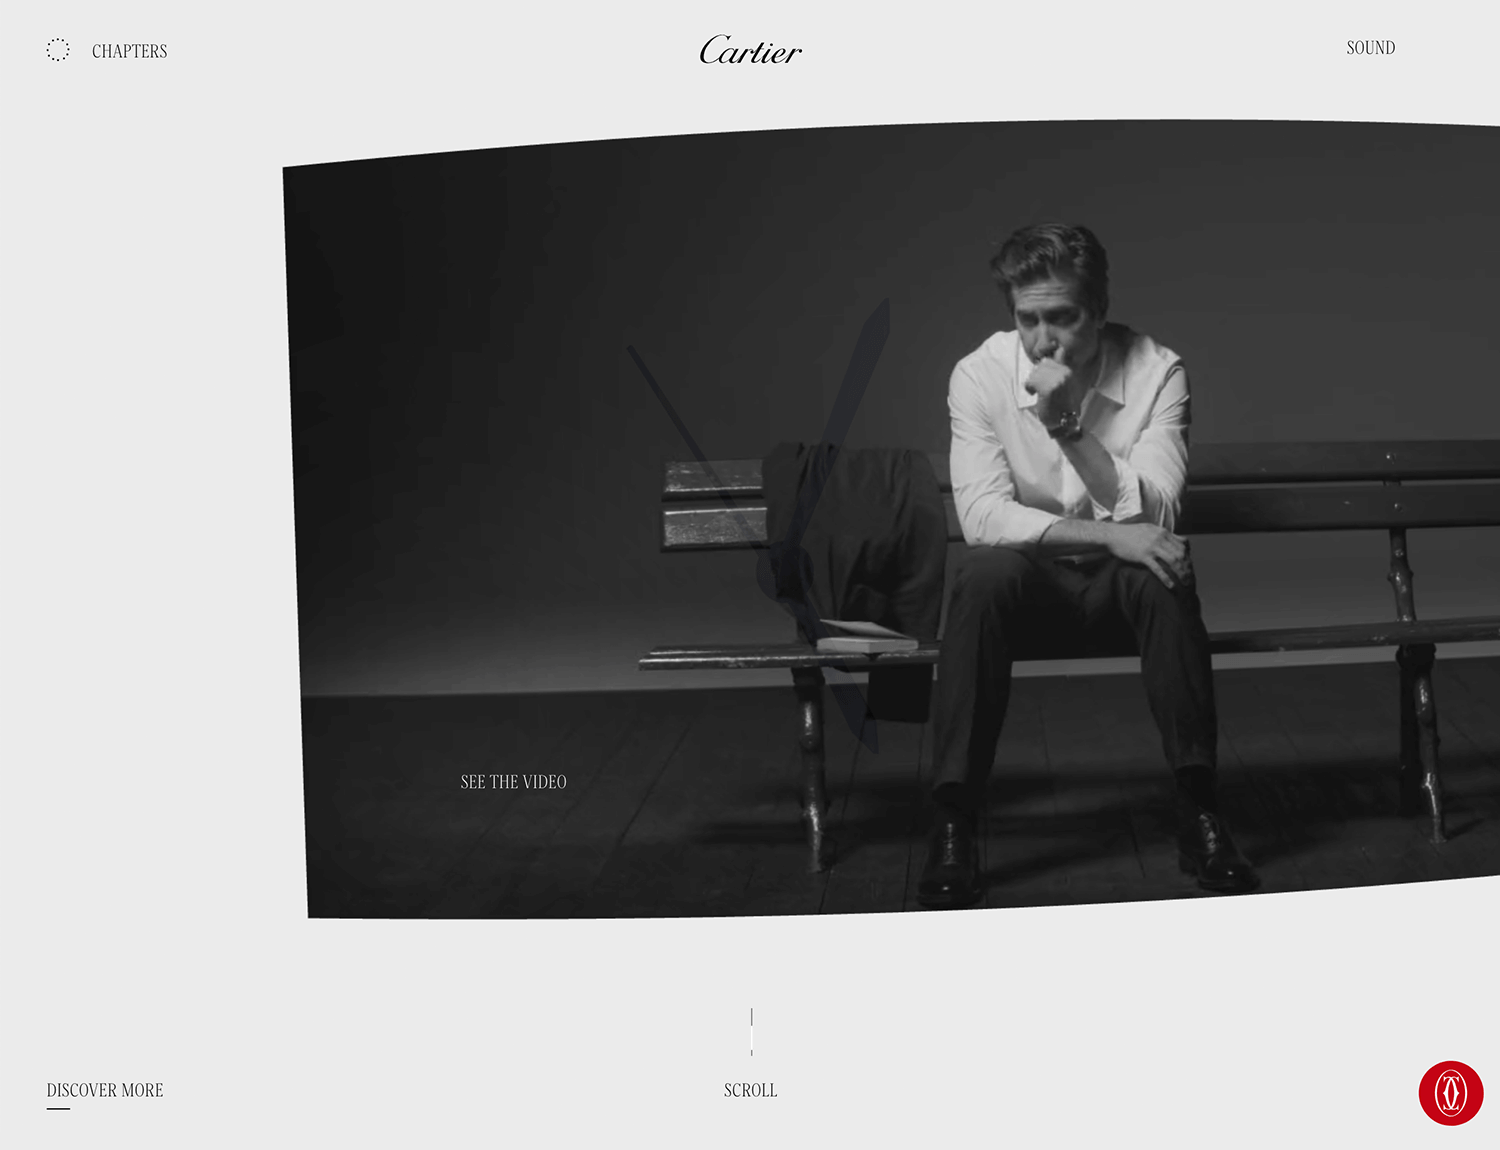 Cartier's website showcasing a man sits on a bench, contemplating, with minimalistic navigation elements surrounding him